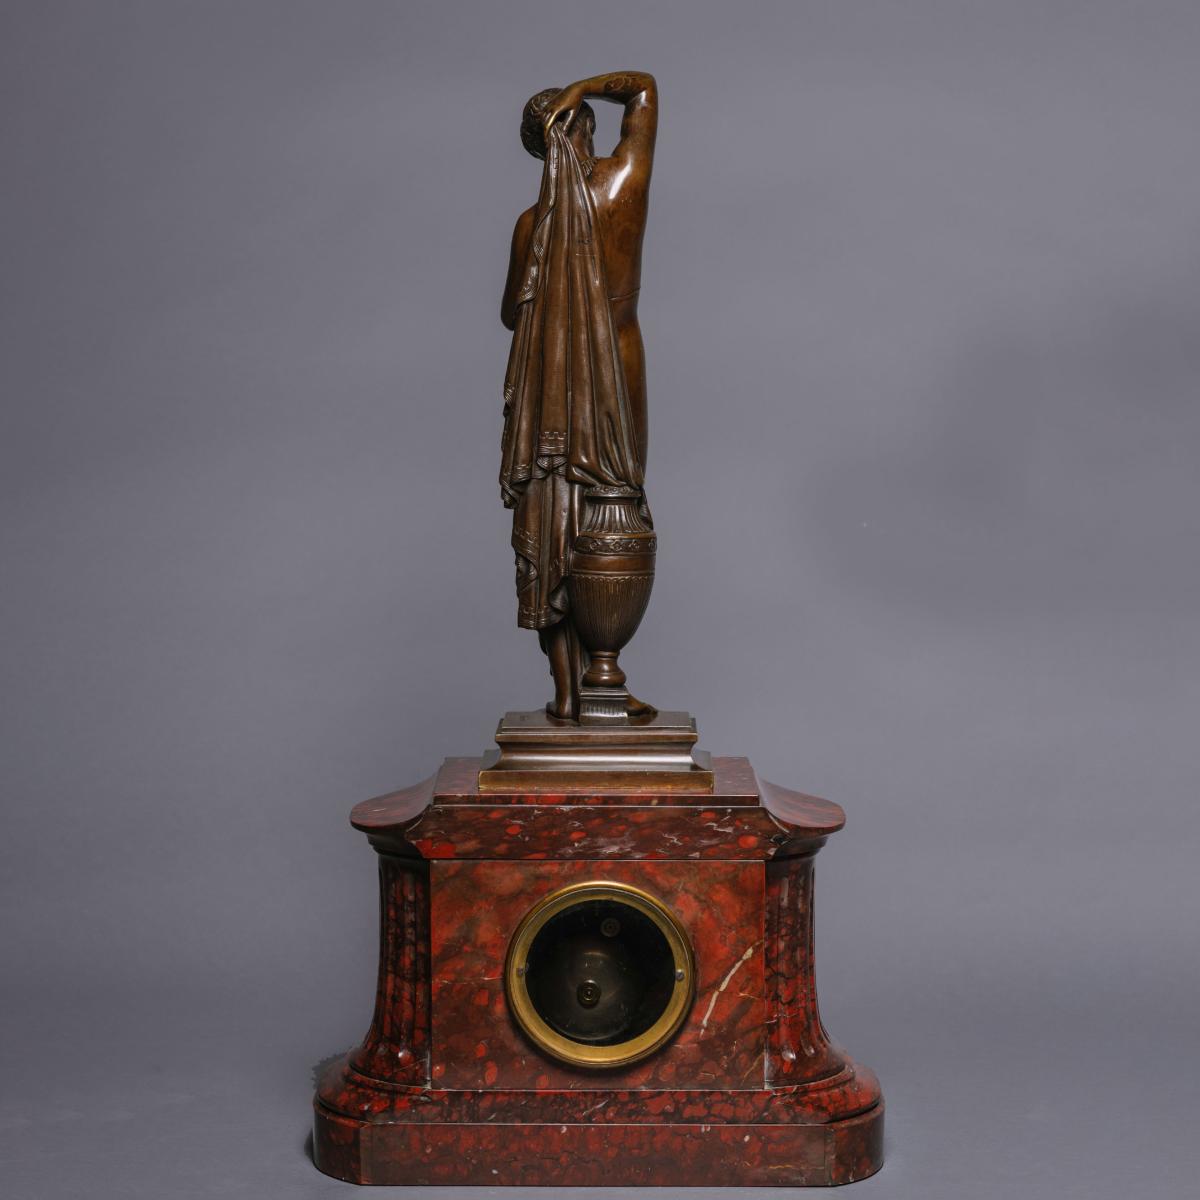 A Napoléon III Marble Mantle Clock With A Patinated Bronze Figure of 'Phryné' by James Pradier